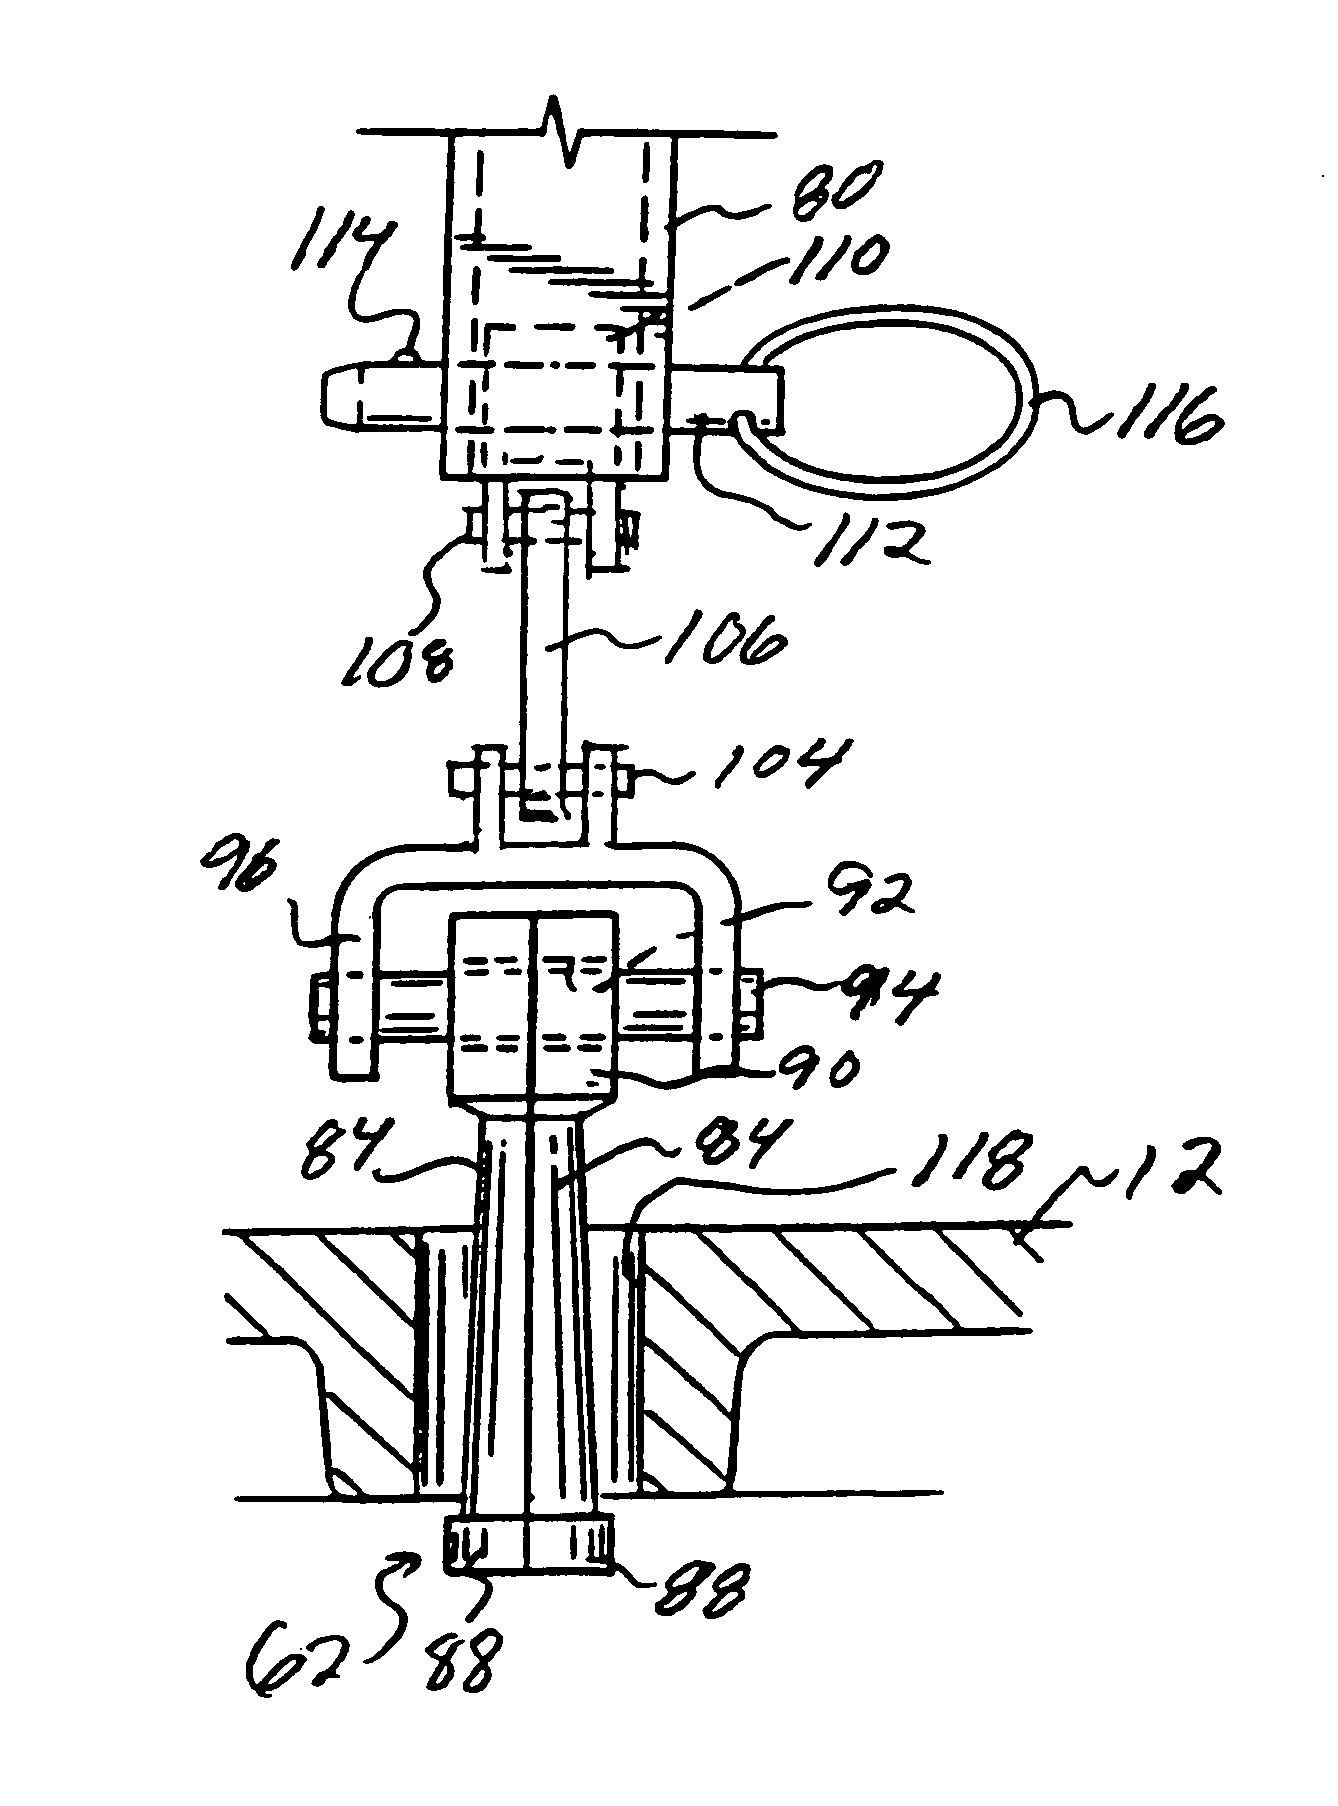 Manhole cover lifting apparatus and method